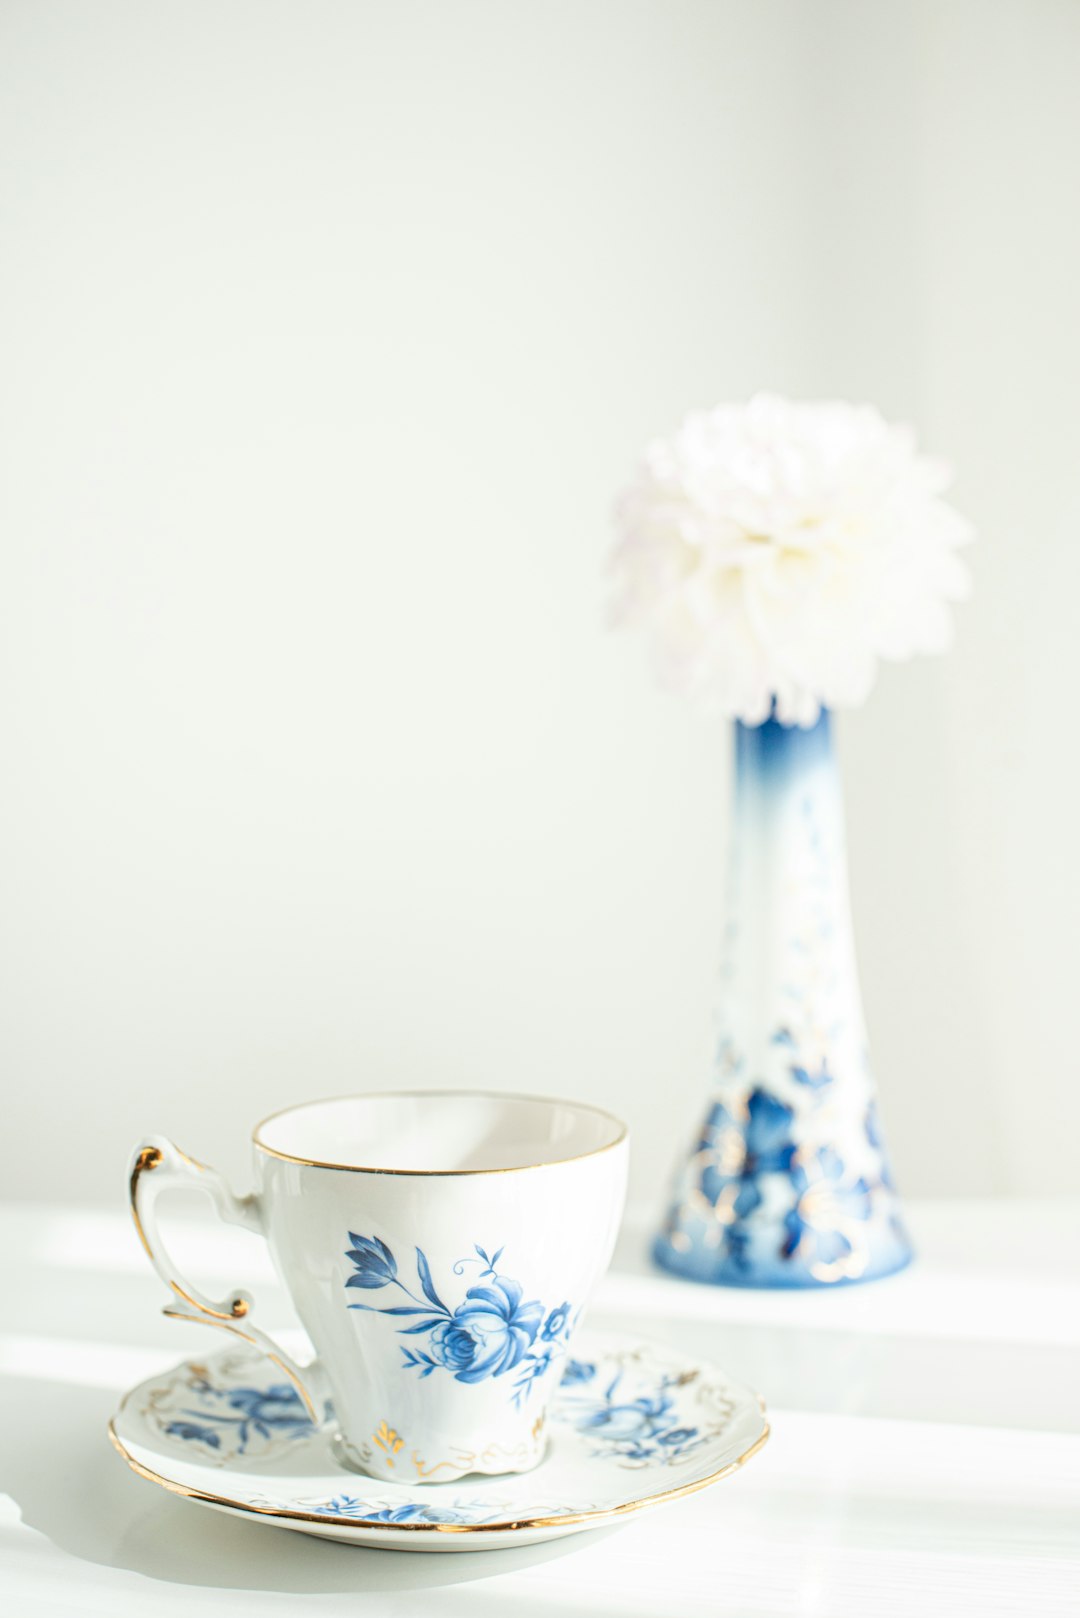 white and blue floral ceramic teacup with white flower